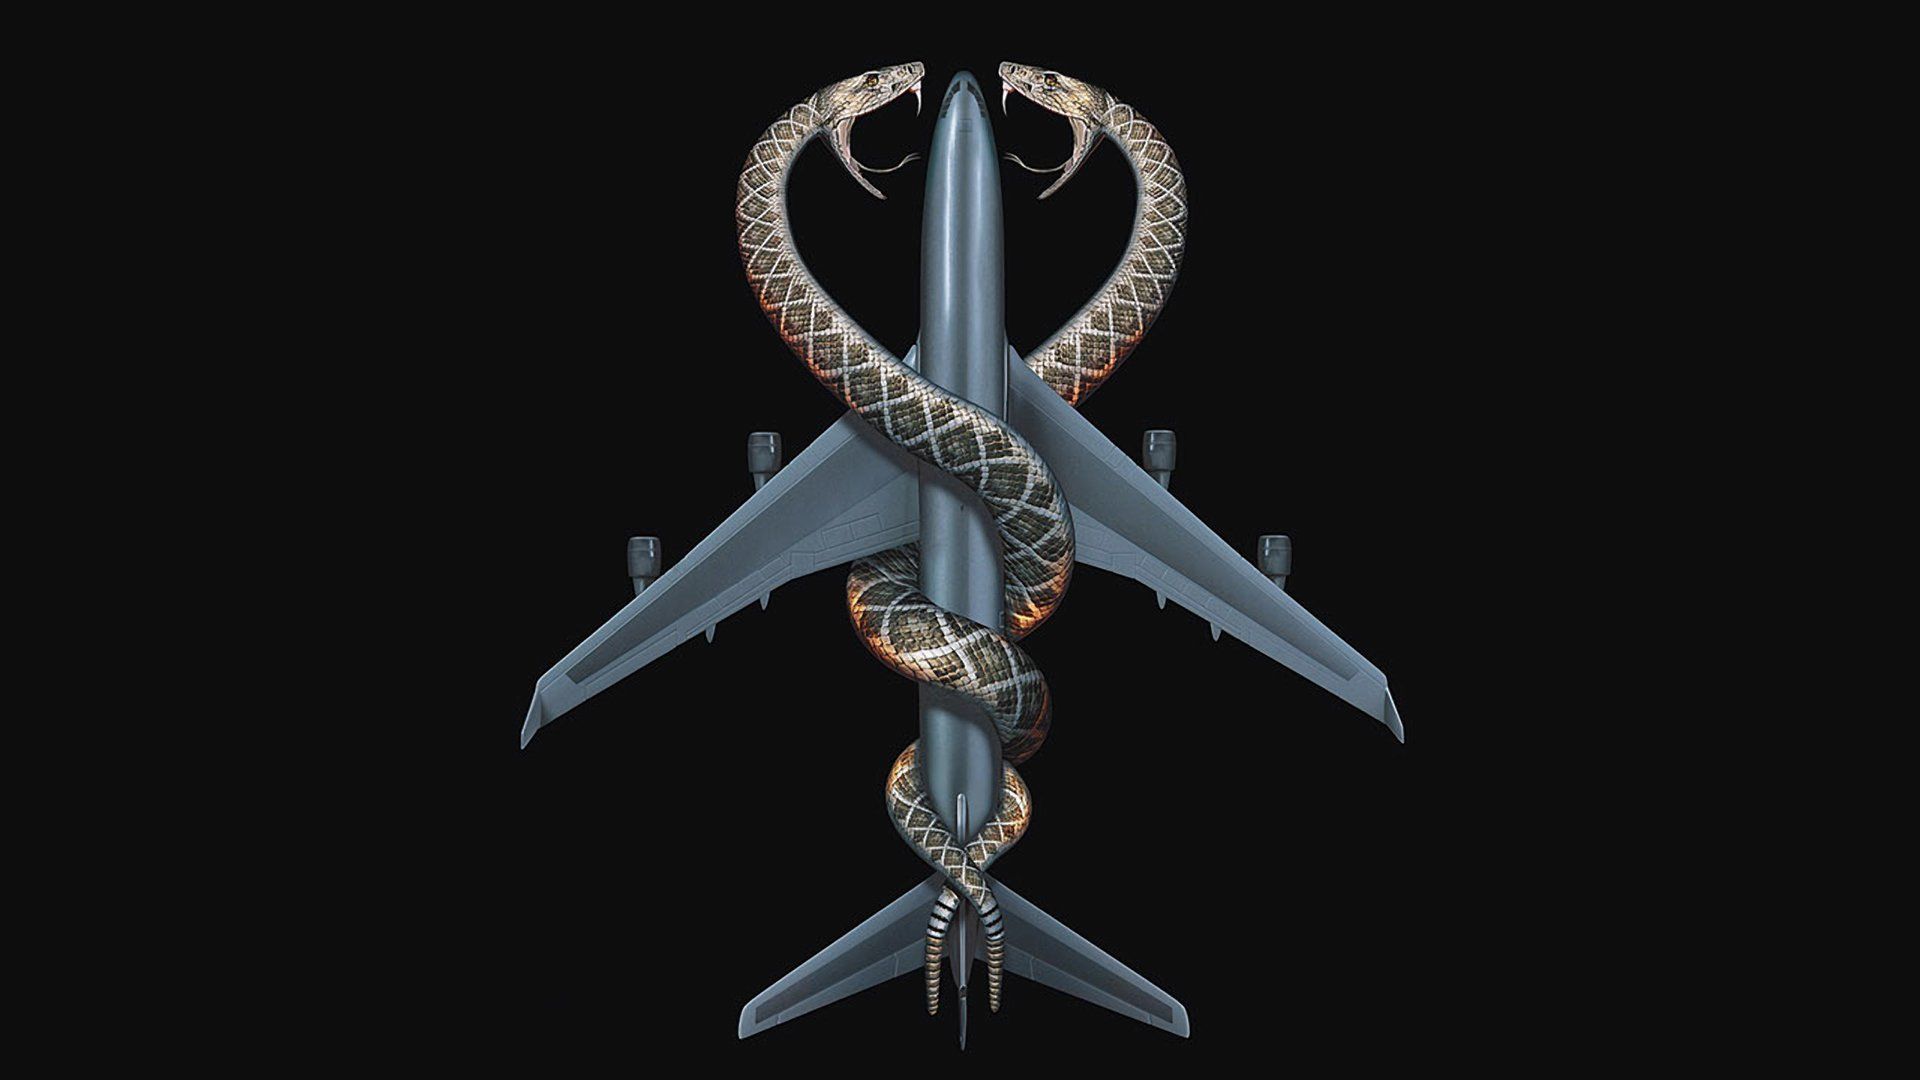 Snakes on a Plane background